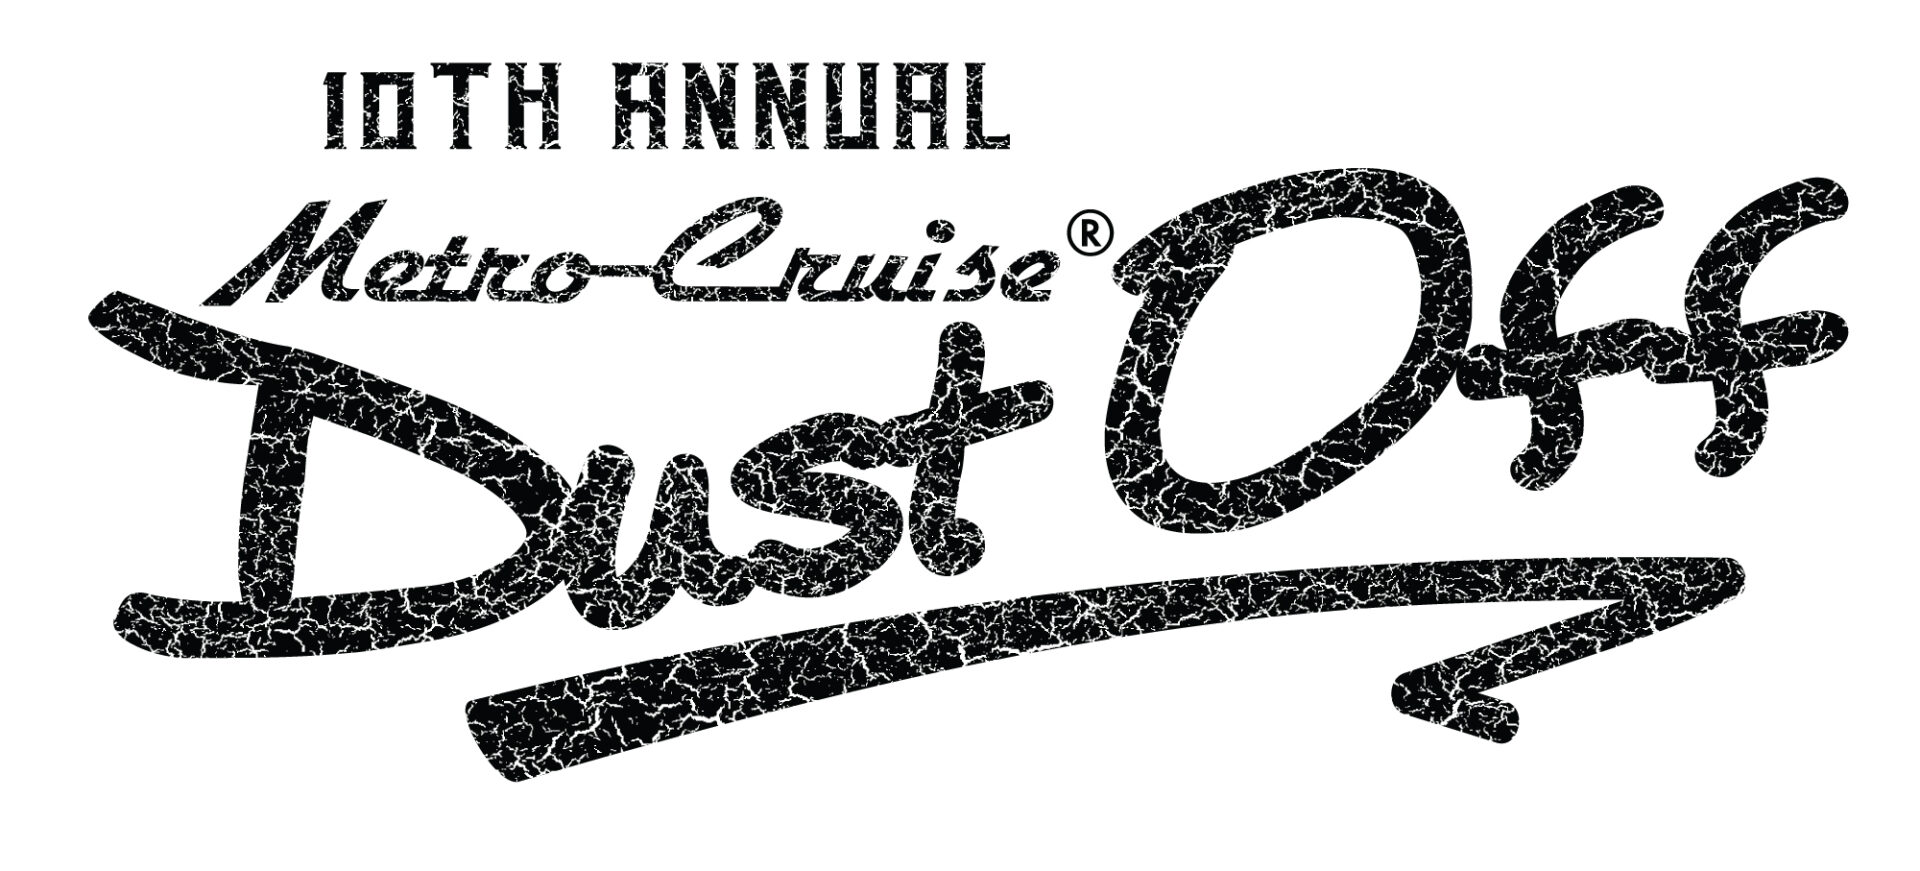 10th annual Metro Cruise Dust Off - Saturday May 5th!